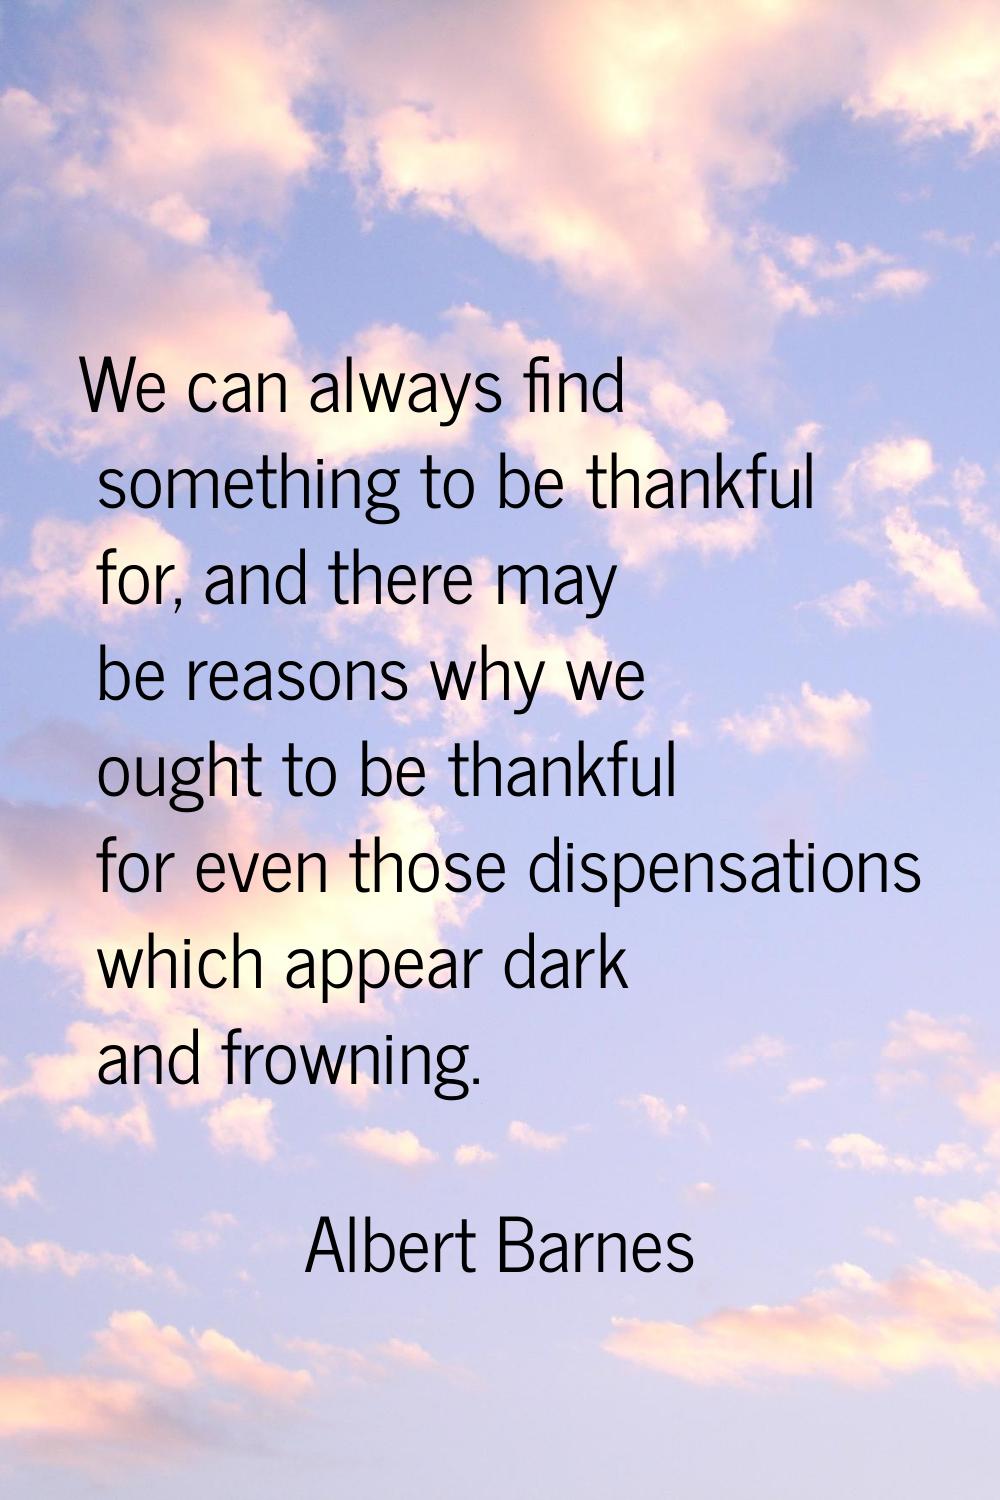 We can always find something to be thankful for, and there may be reasons why we ought to be thankf